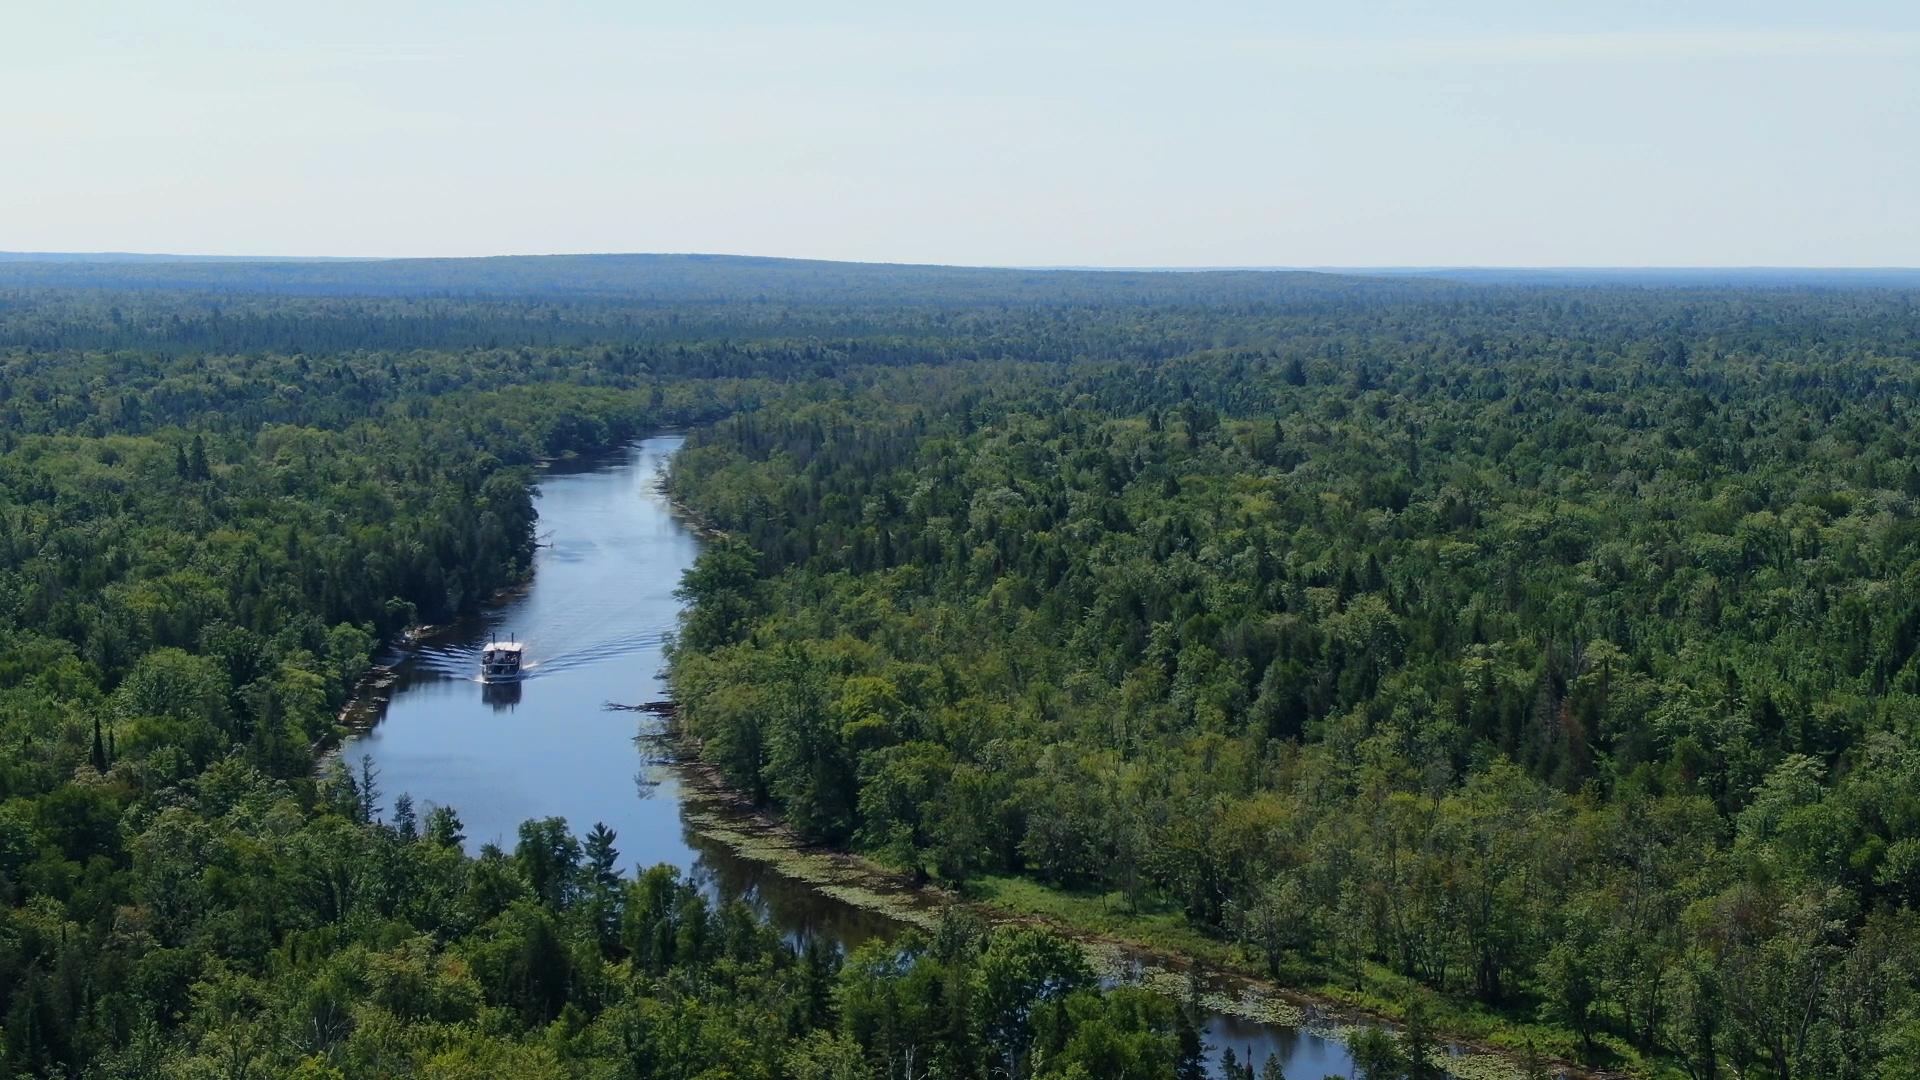 A birdseye view of the Tahquamenon Falls Riverboat moving along the river.